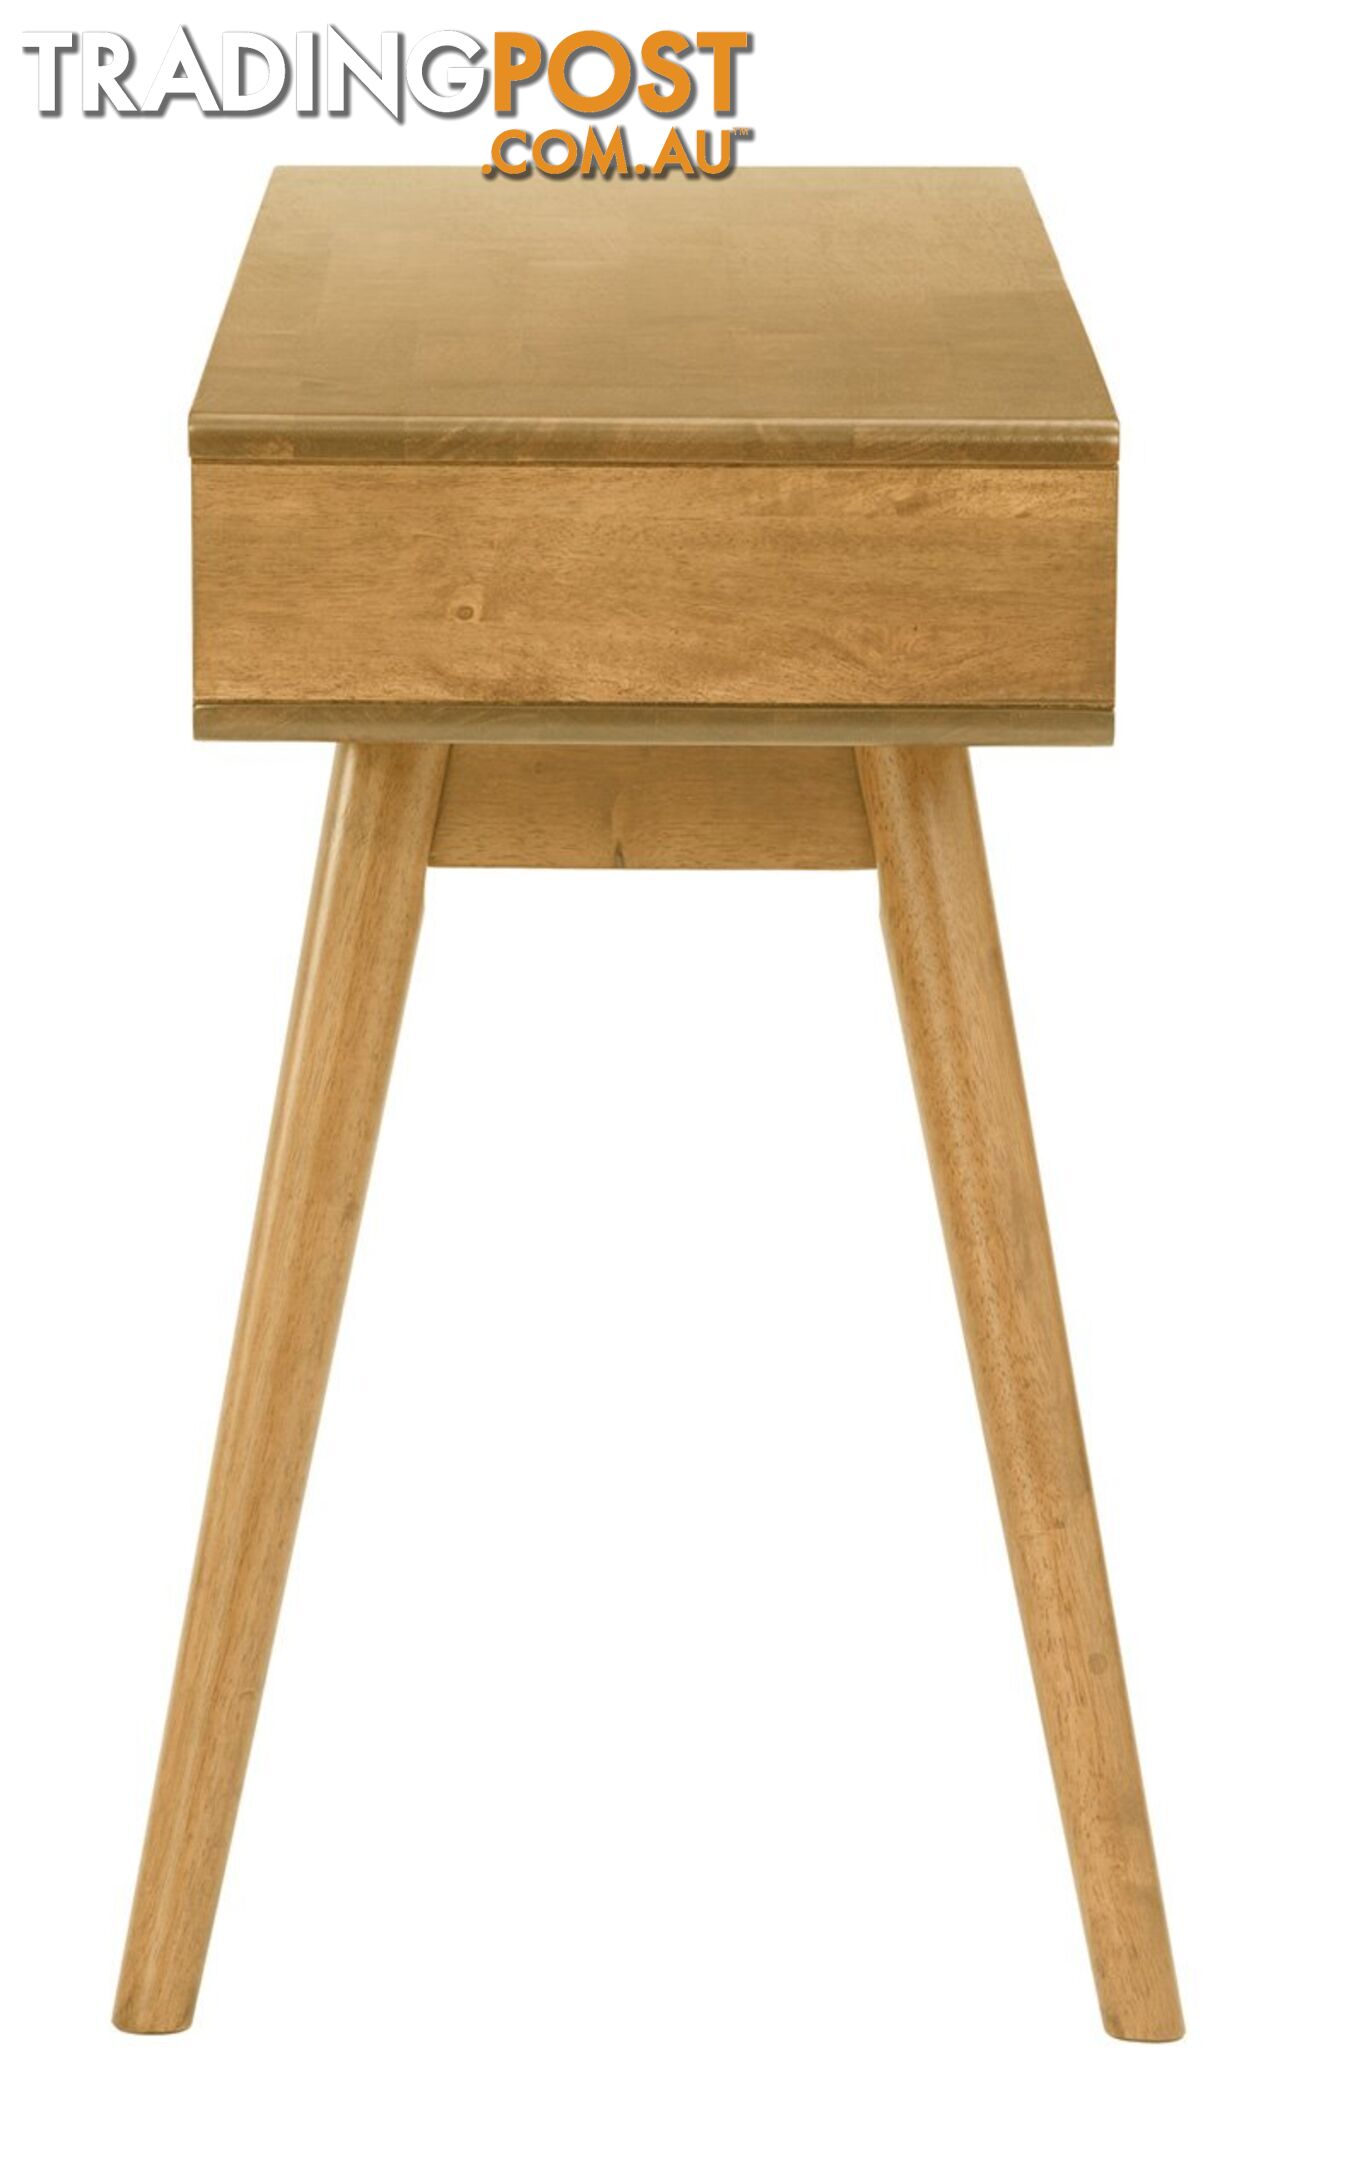 LAMAR Console Table with 2 Drawers 122cm - Natural - 134052 - 9334719000619